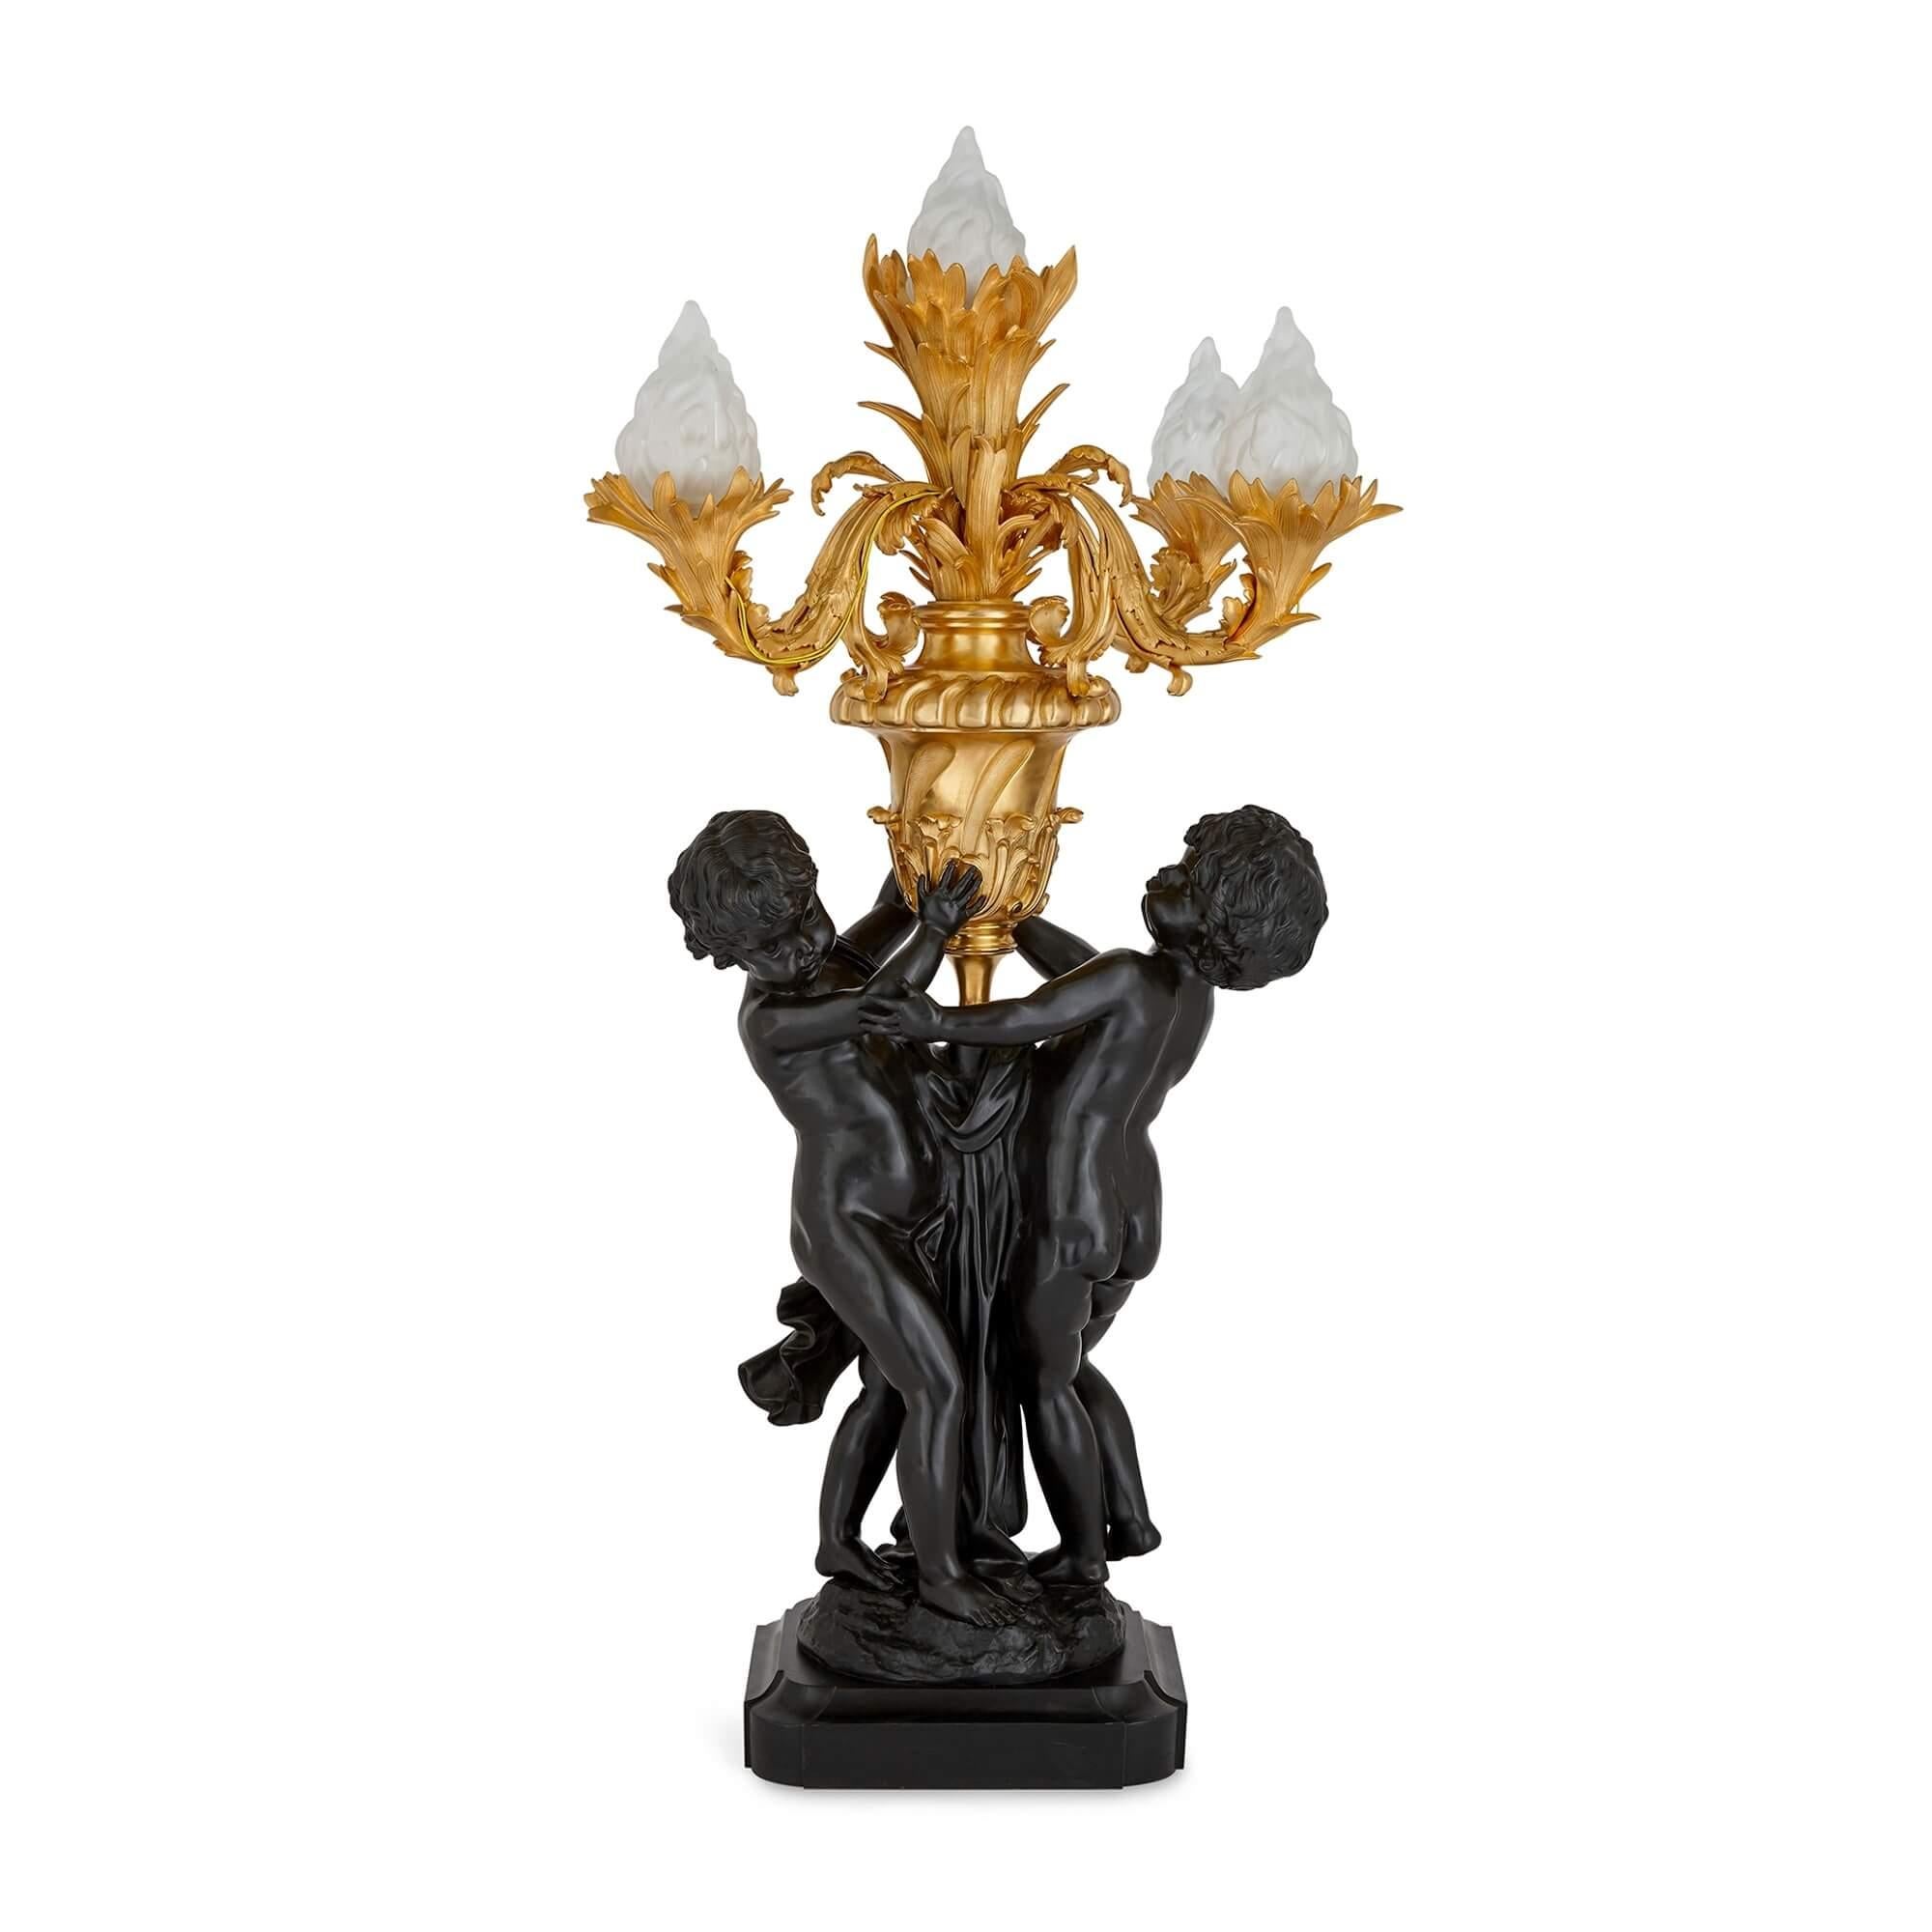 Pair of large Louis XVI style gilt and patinated bronze cherub candelabra
French, 20th century
Height: 147cm, width: 69cm, depth: 69cm

Impressive in size and exceptional in the quality of their execution, these excellent candelabra are made in